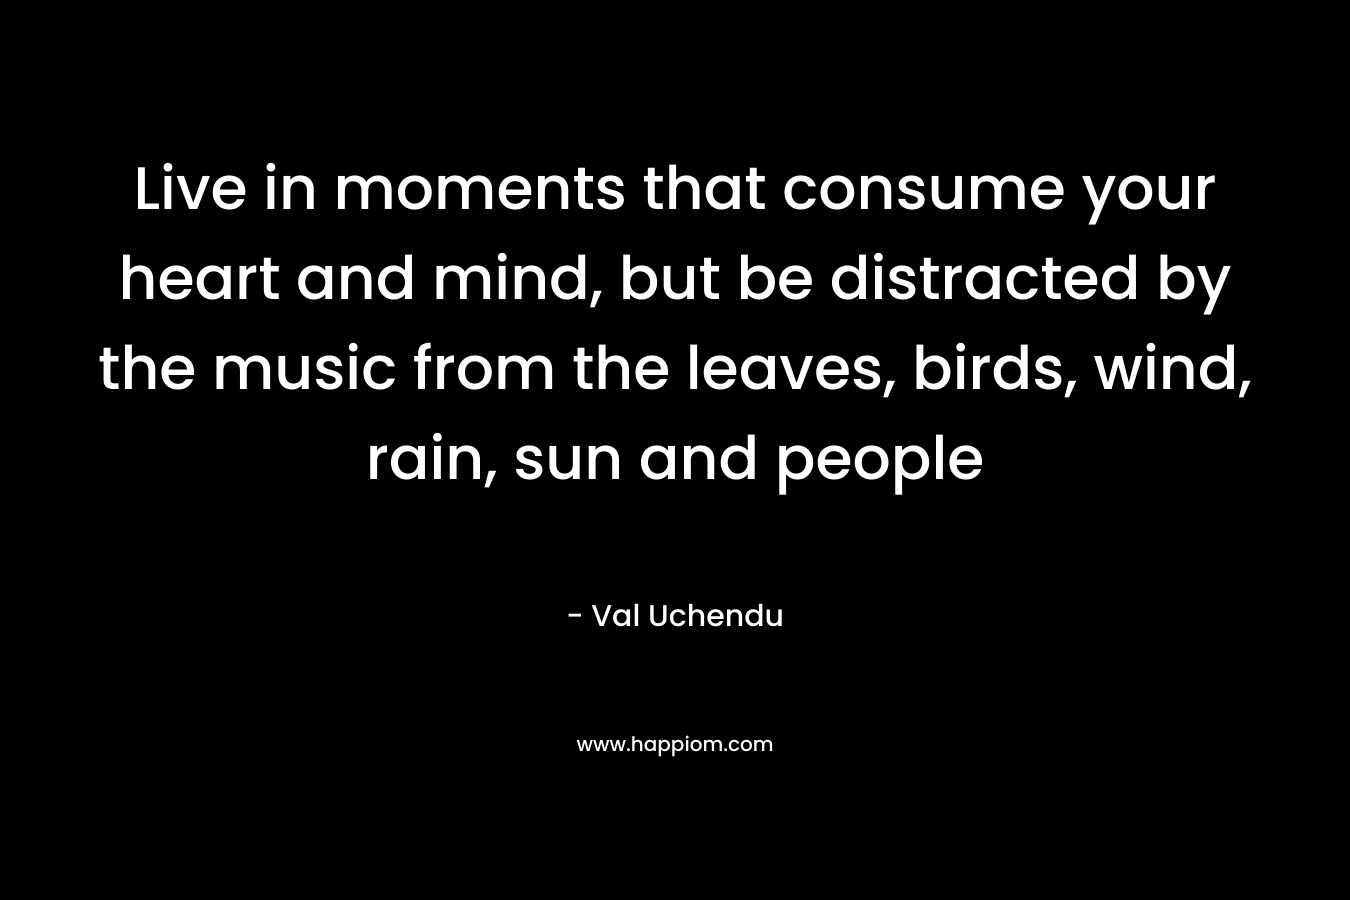 Live in moments that consume your heart and mind, but be distracted by the music from the leaves, birds, wind, rain, sun and people – Val Uchendu